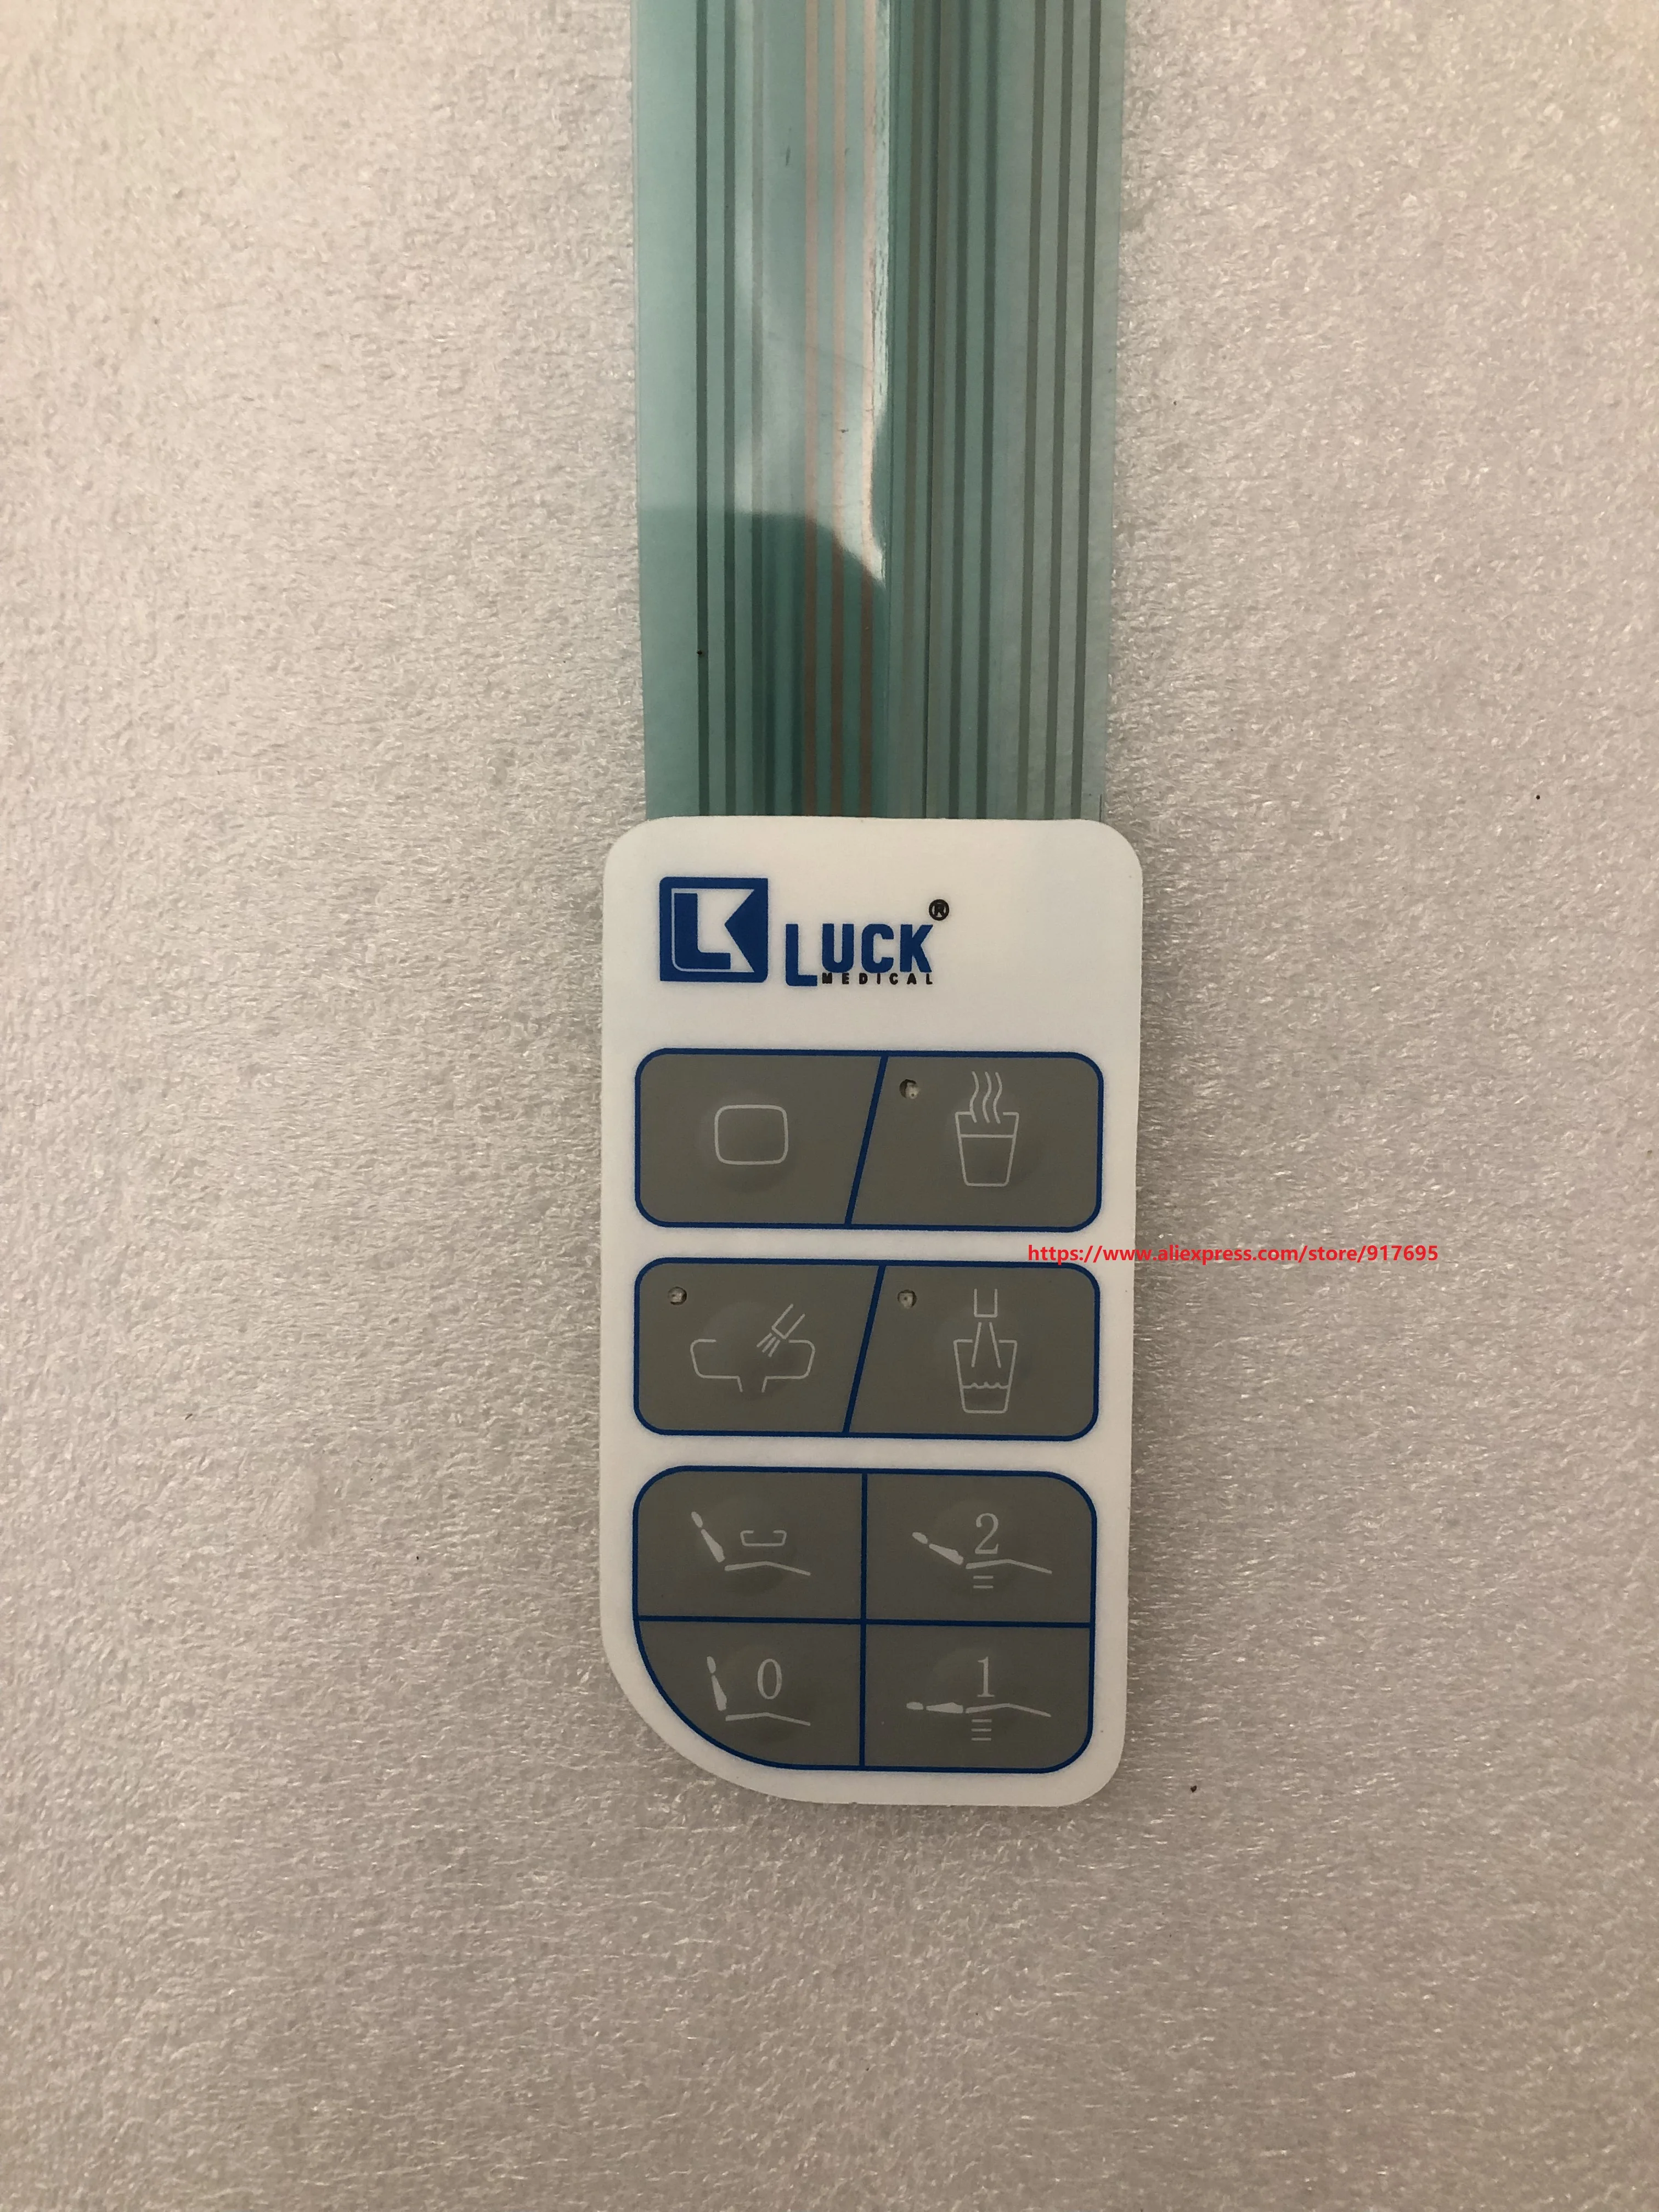 Dental Chair LUCK-I & LUCK-II Use  Auxiliary Control Panel